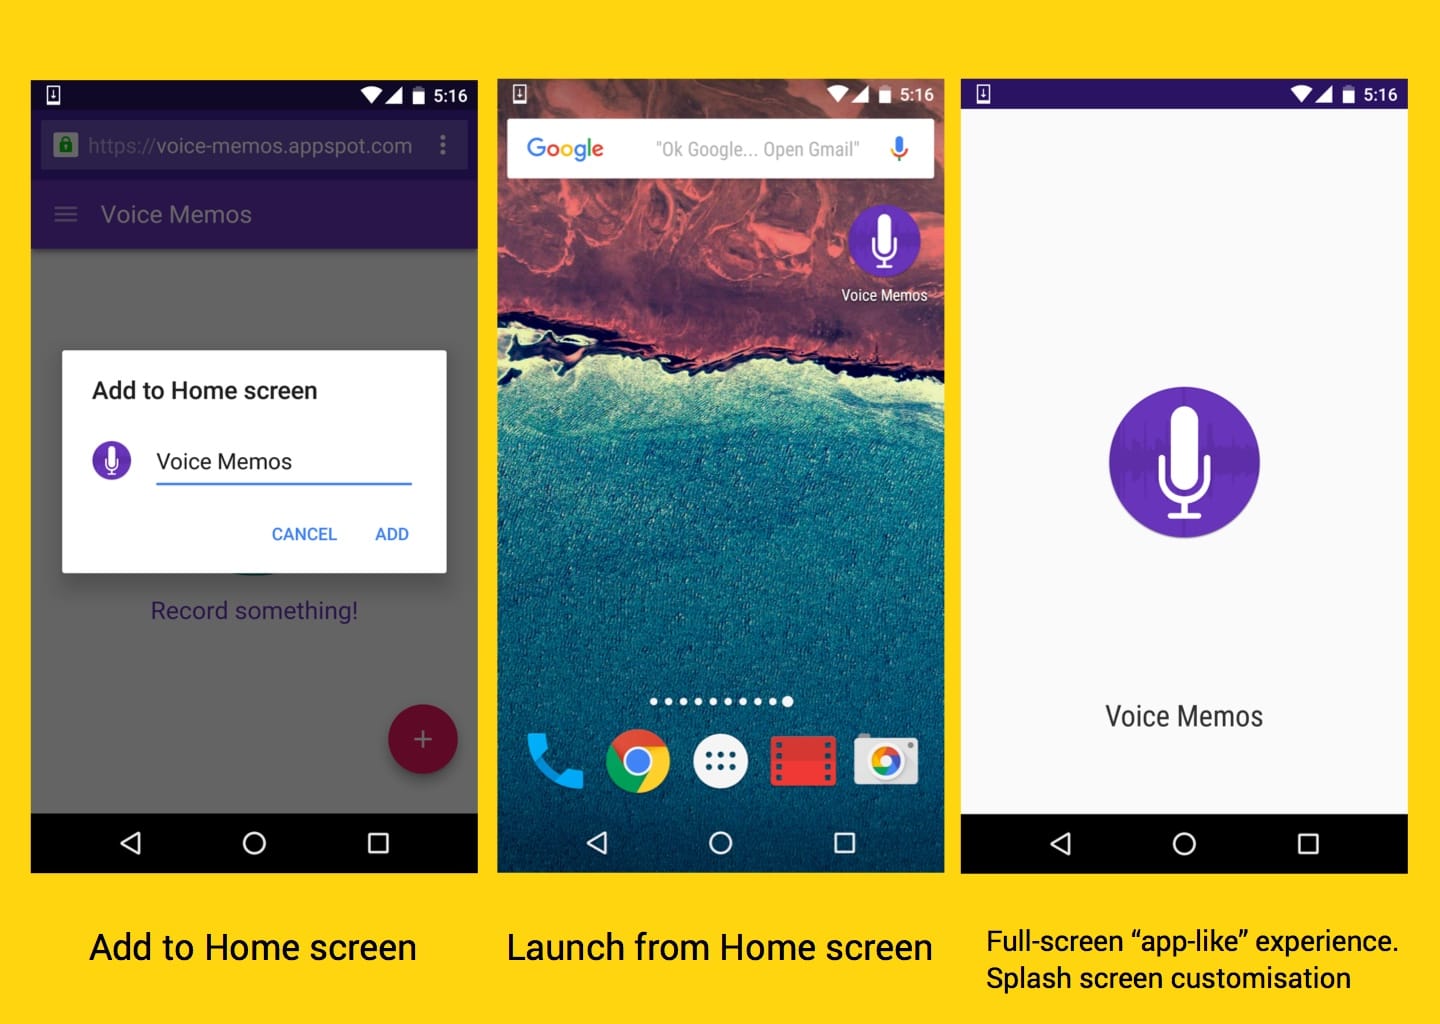 Add to home screen, launch from home screen and full-screen app-like experiences.